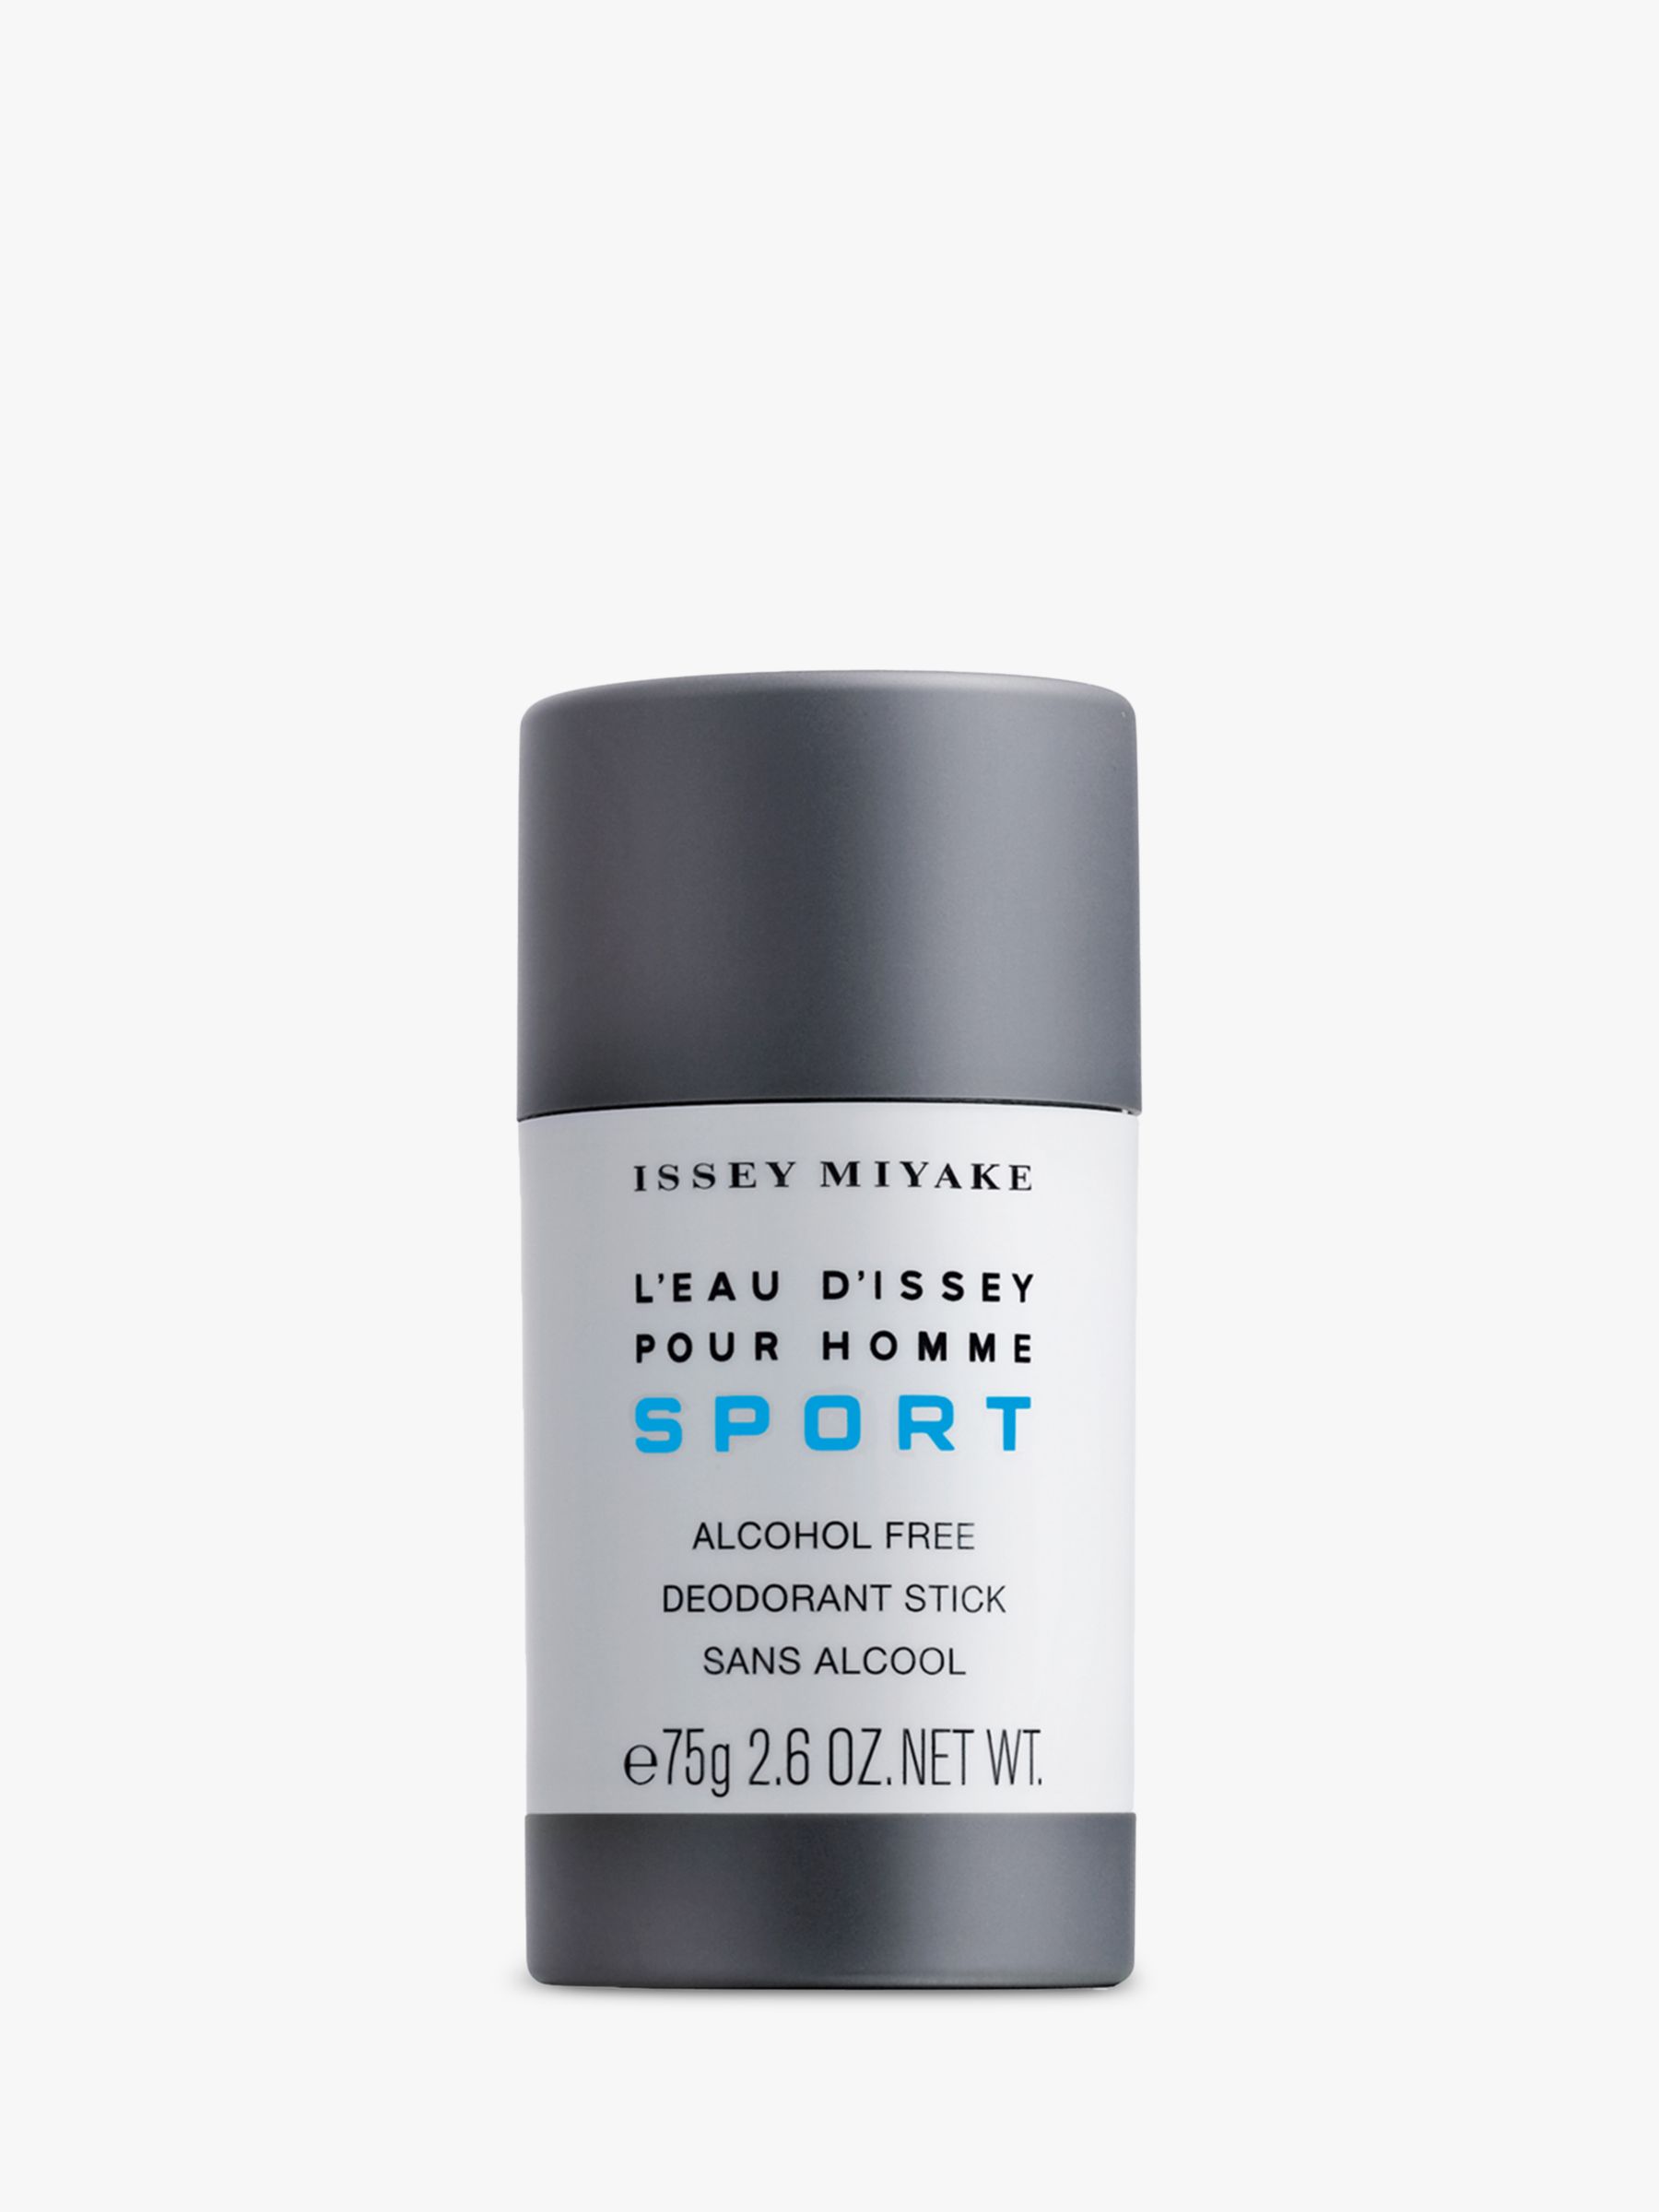 Issey Miyake L'Eau d'Issey Pour Homme Sport Deodorant Stick, 75g